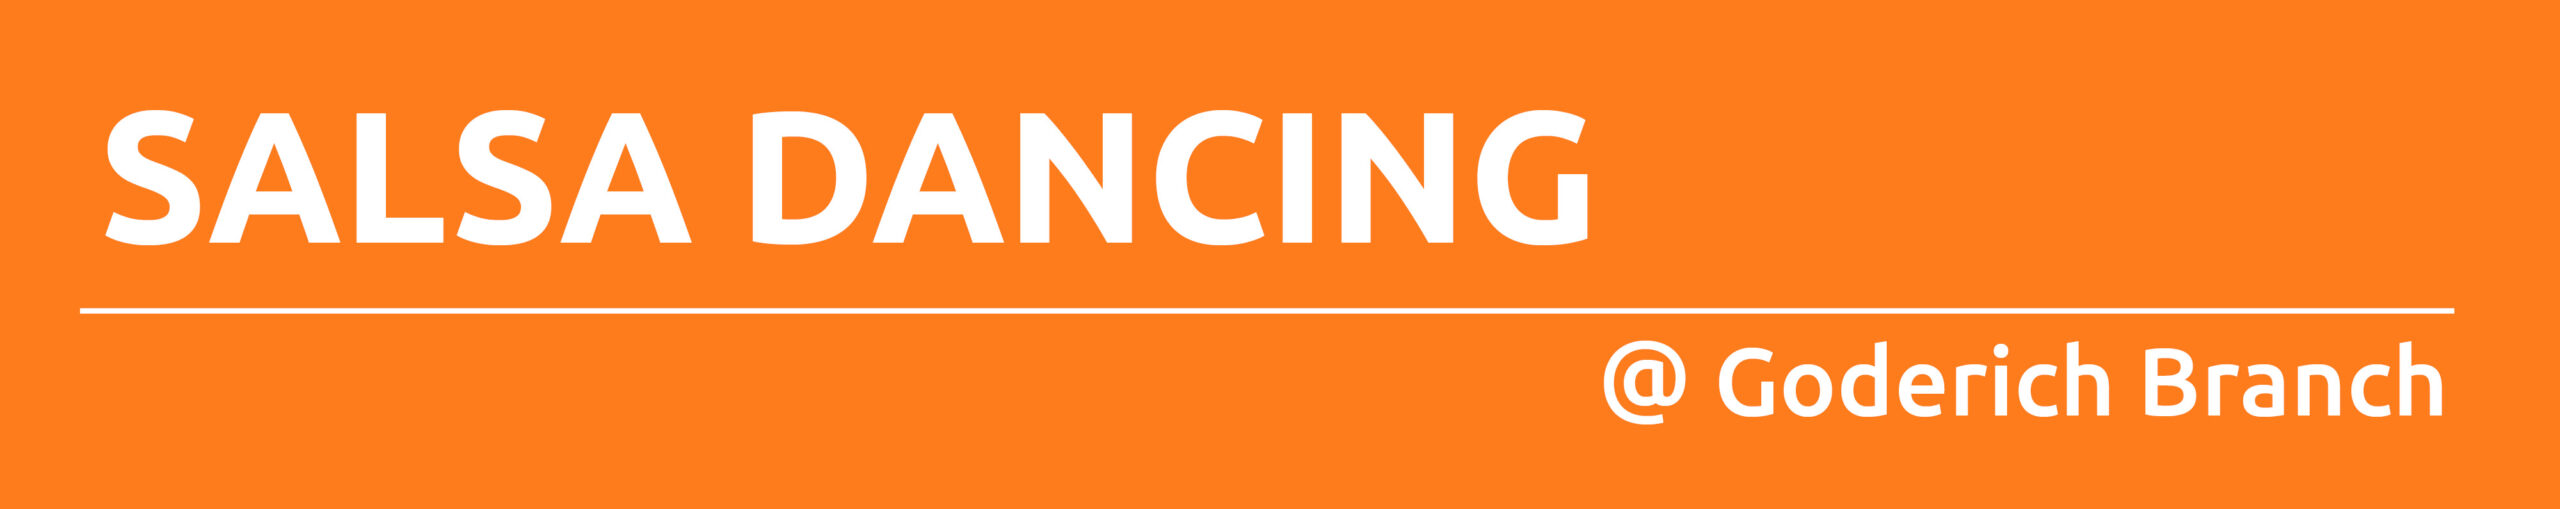 Orange rectangle with white text promoting salsa dancing at Goderich